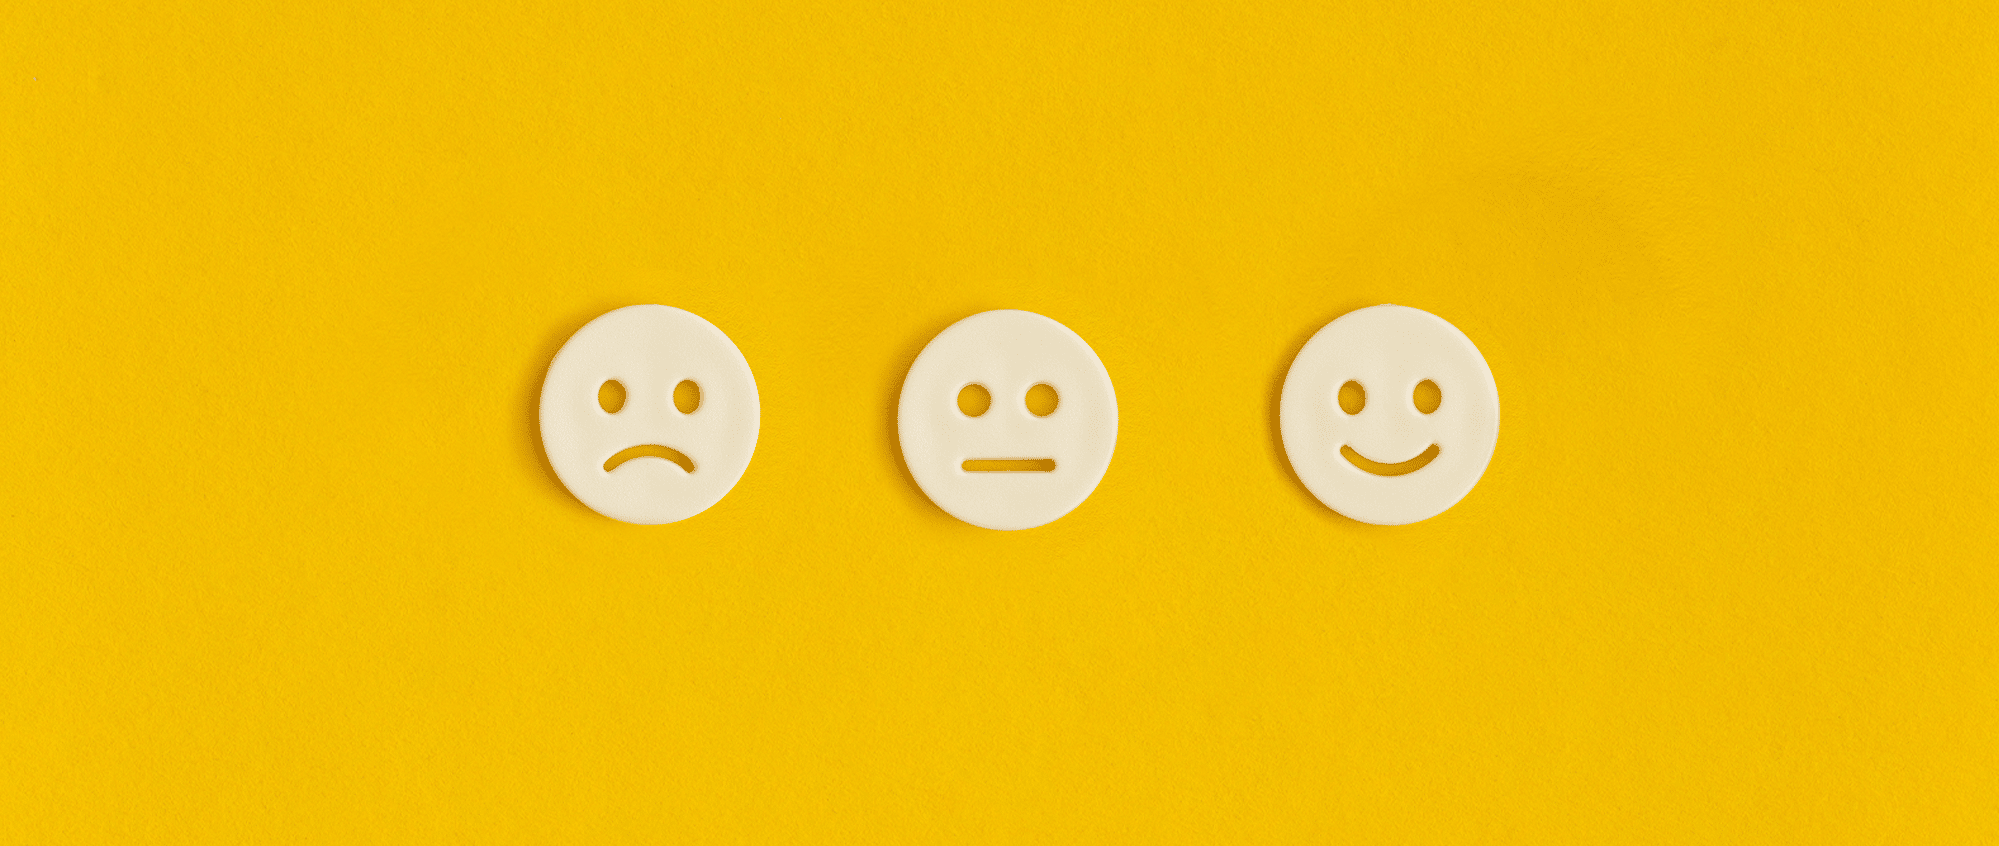 a series of smiley faces that show sadness, neutrality, and happiness